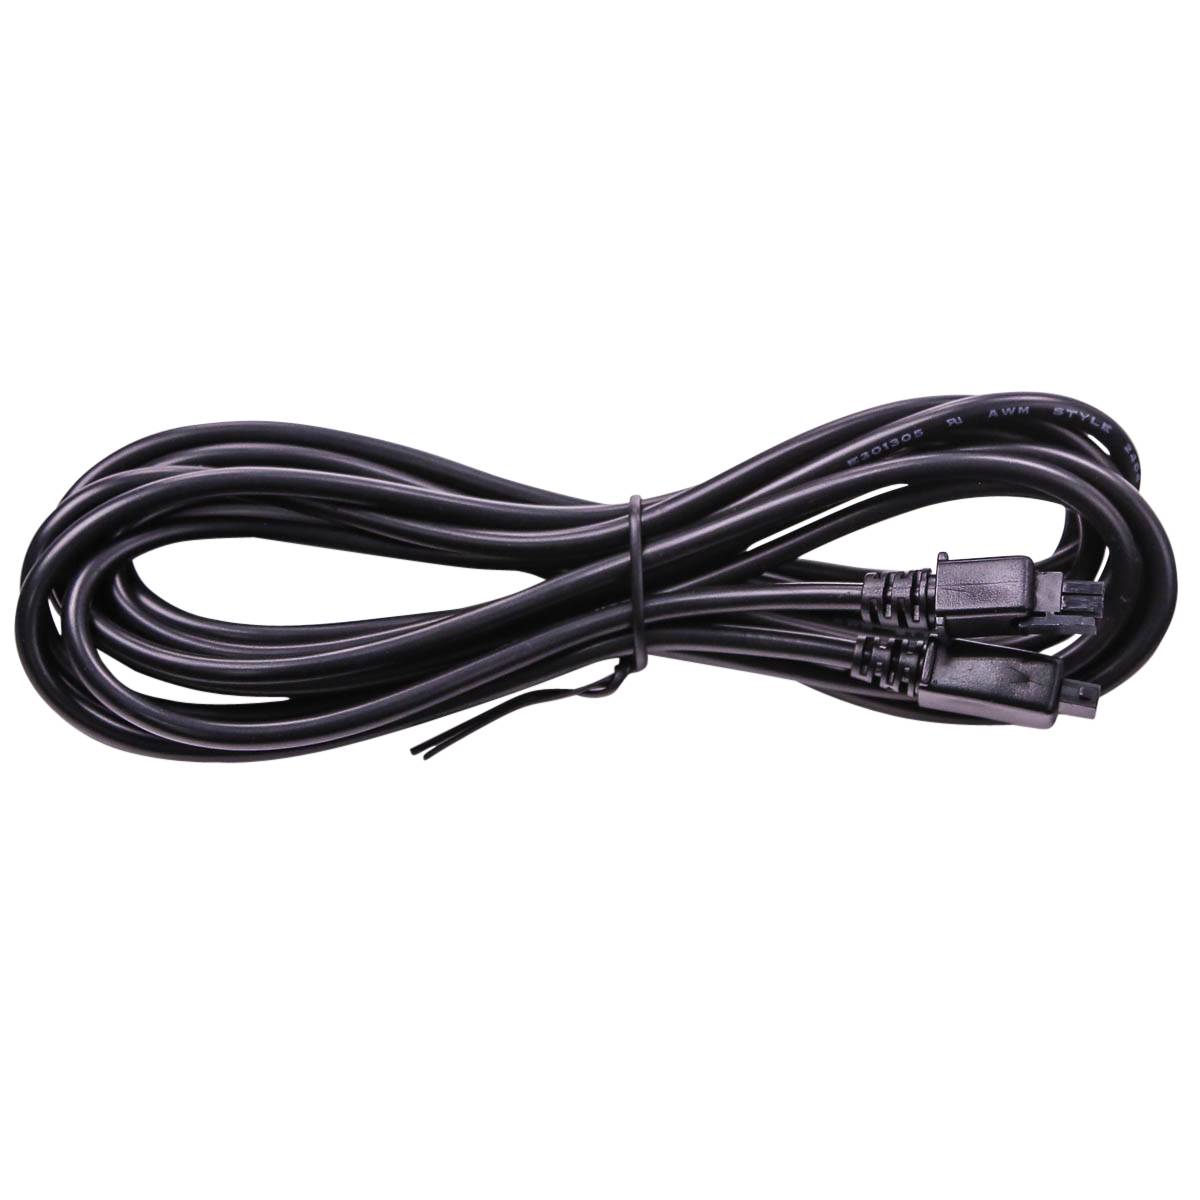 M/F DC24 Extension Cable - 10' - Neptune Systems - Neptune Systems